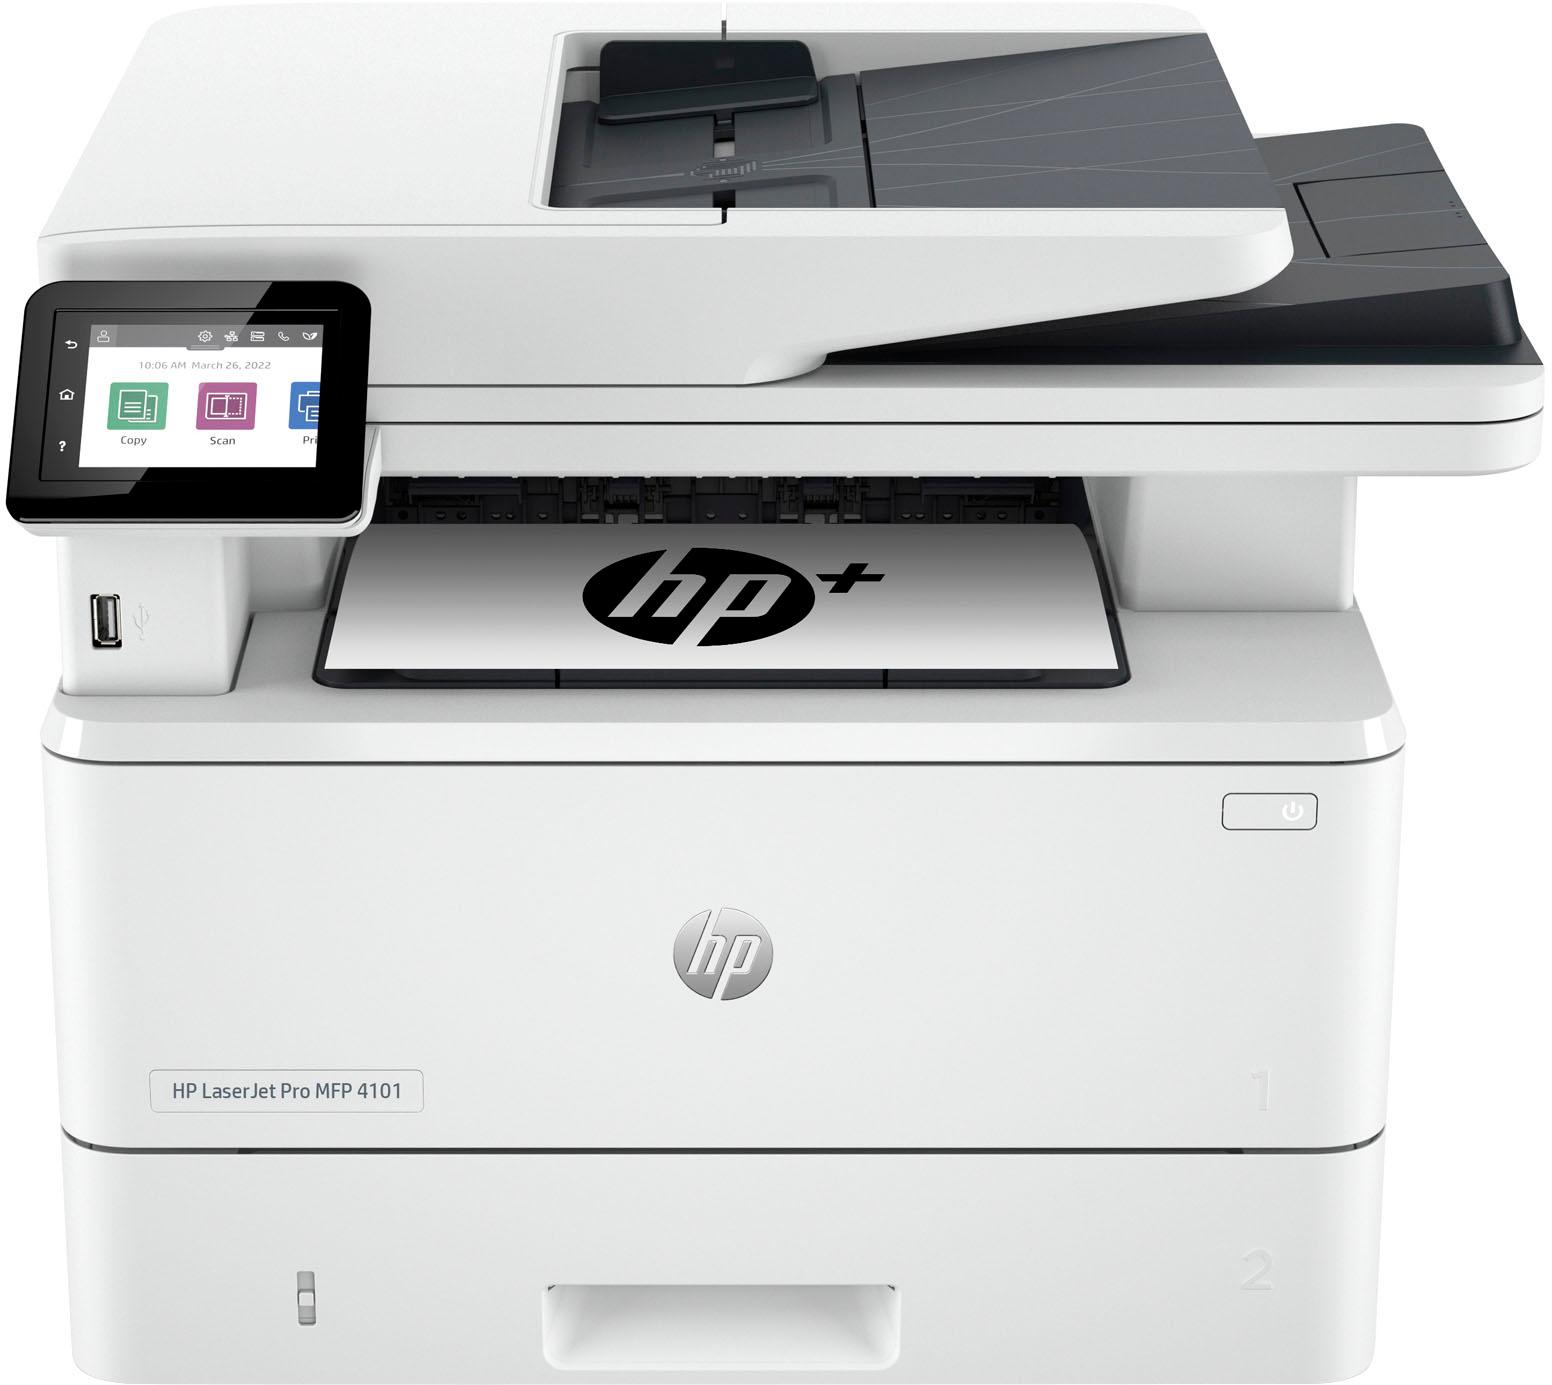 HP LaserJet Pro MFP 4101fdne Black-and-White Printer with 3 months of Instant Ink included with HP+ White LaserJet MFP 4101fdne Best Buy